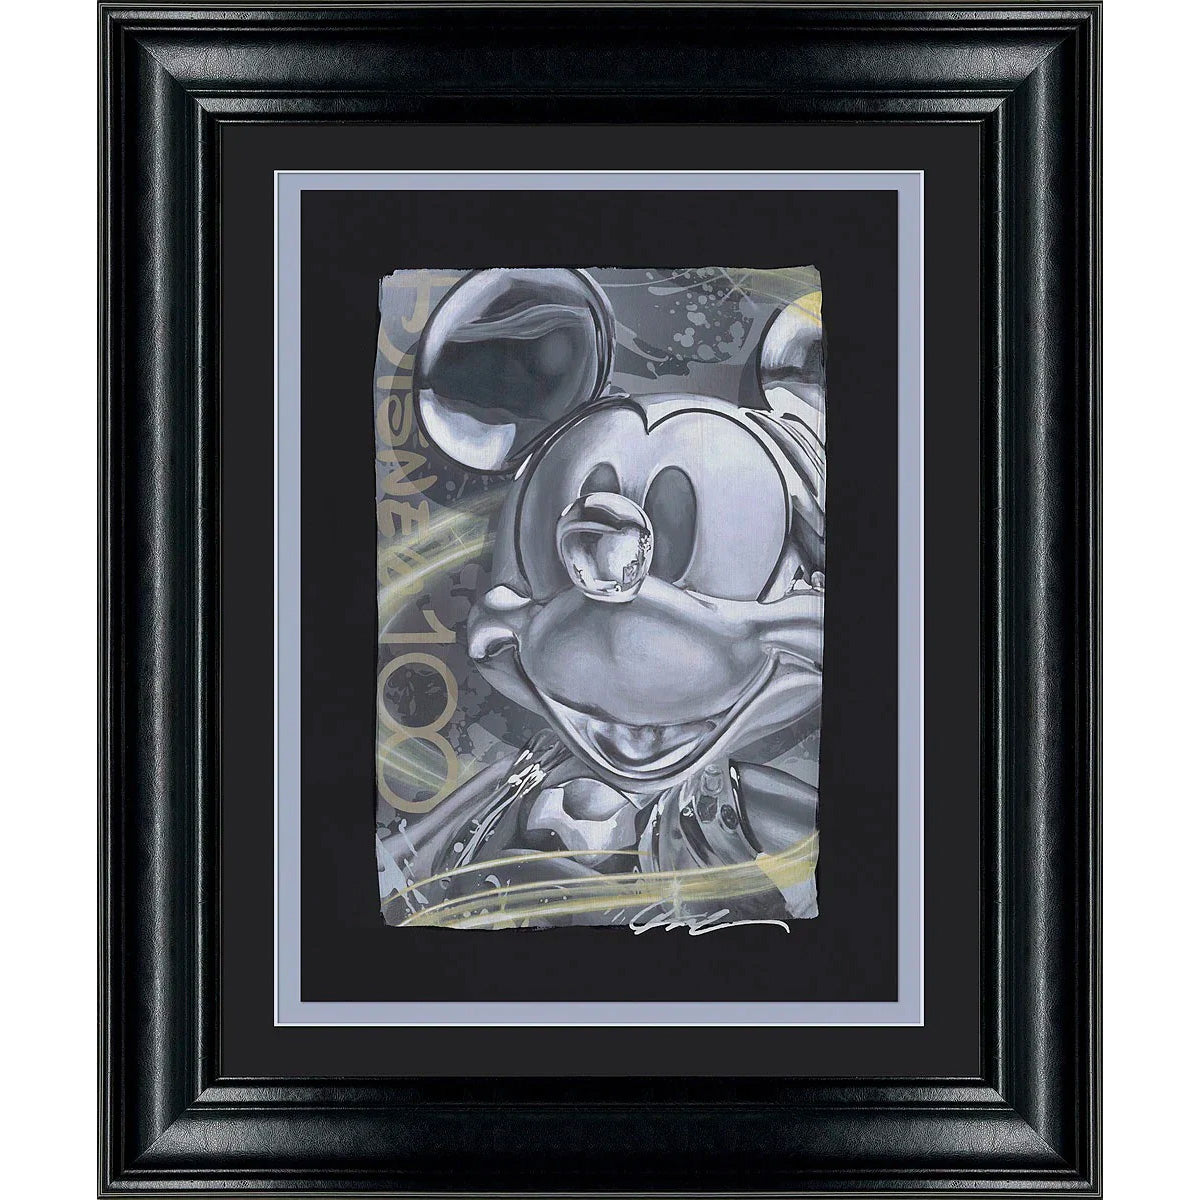 Arcy Disney "Celebrating 100 Years" Limited Edition Canvas Giclee